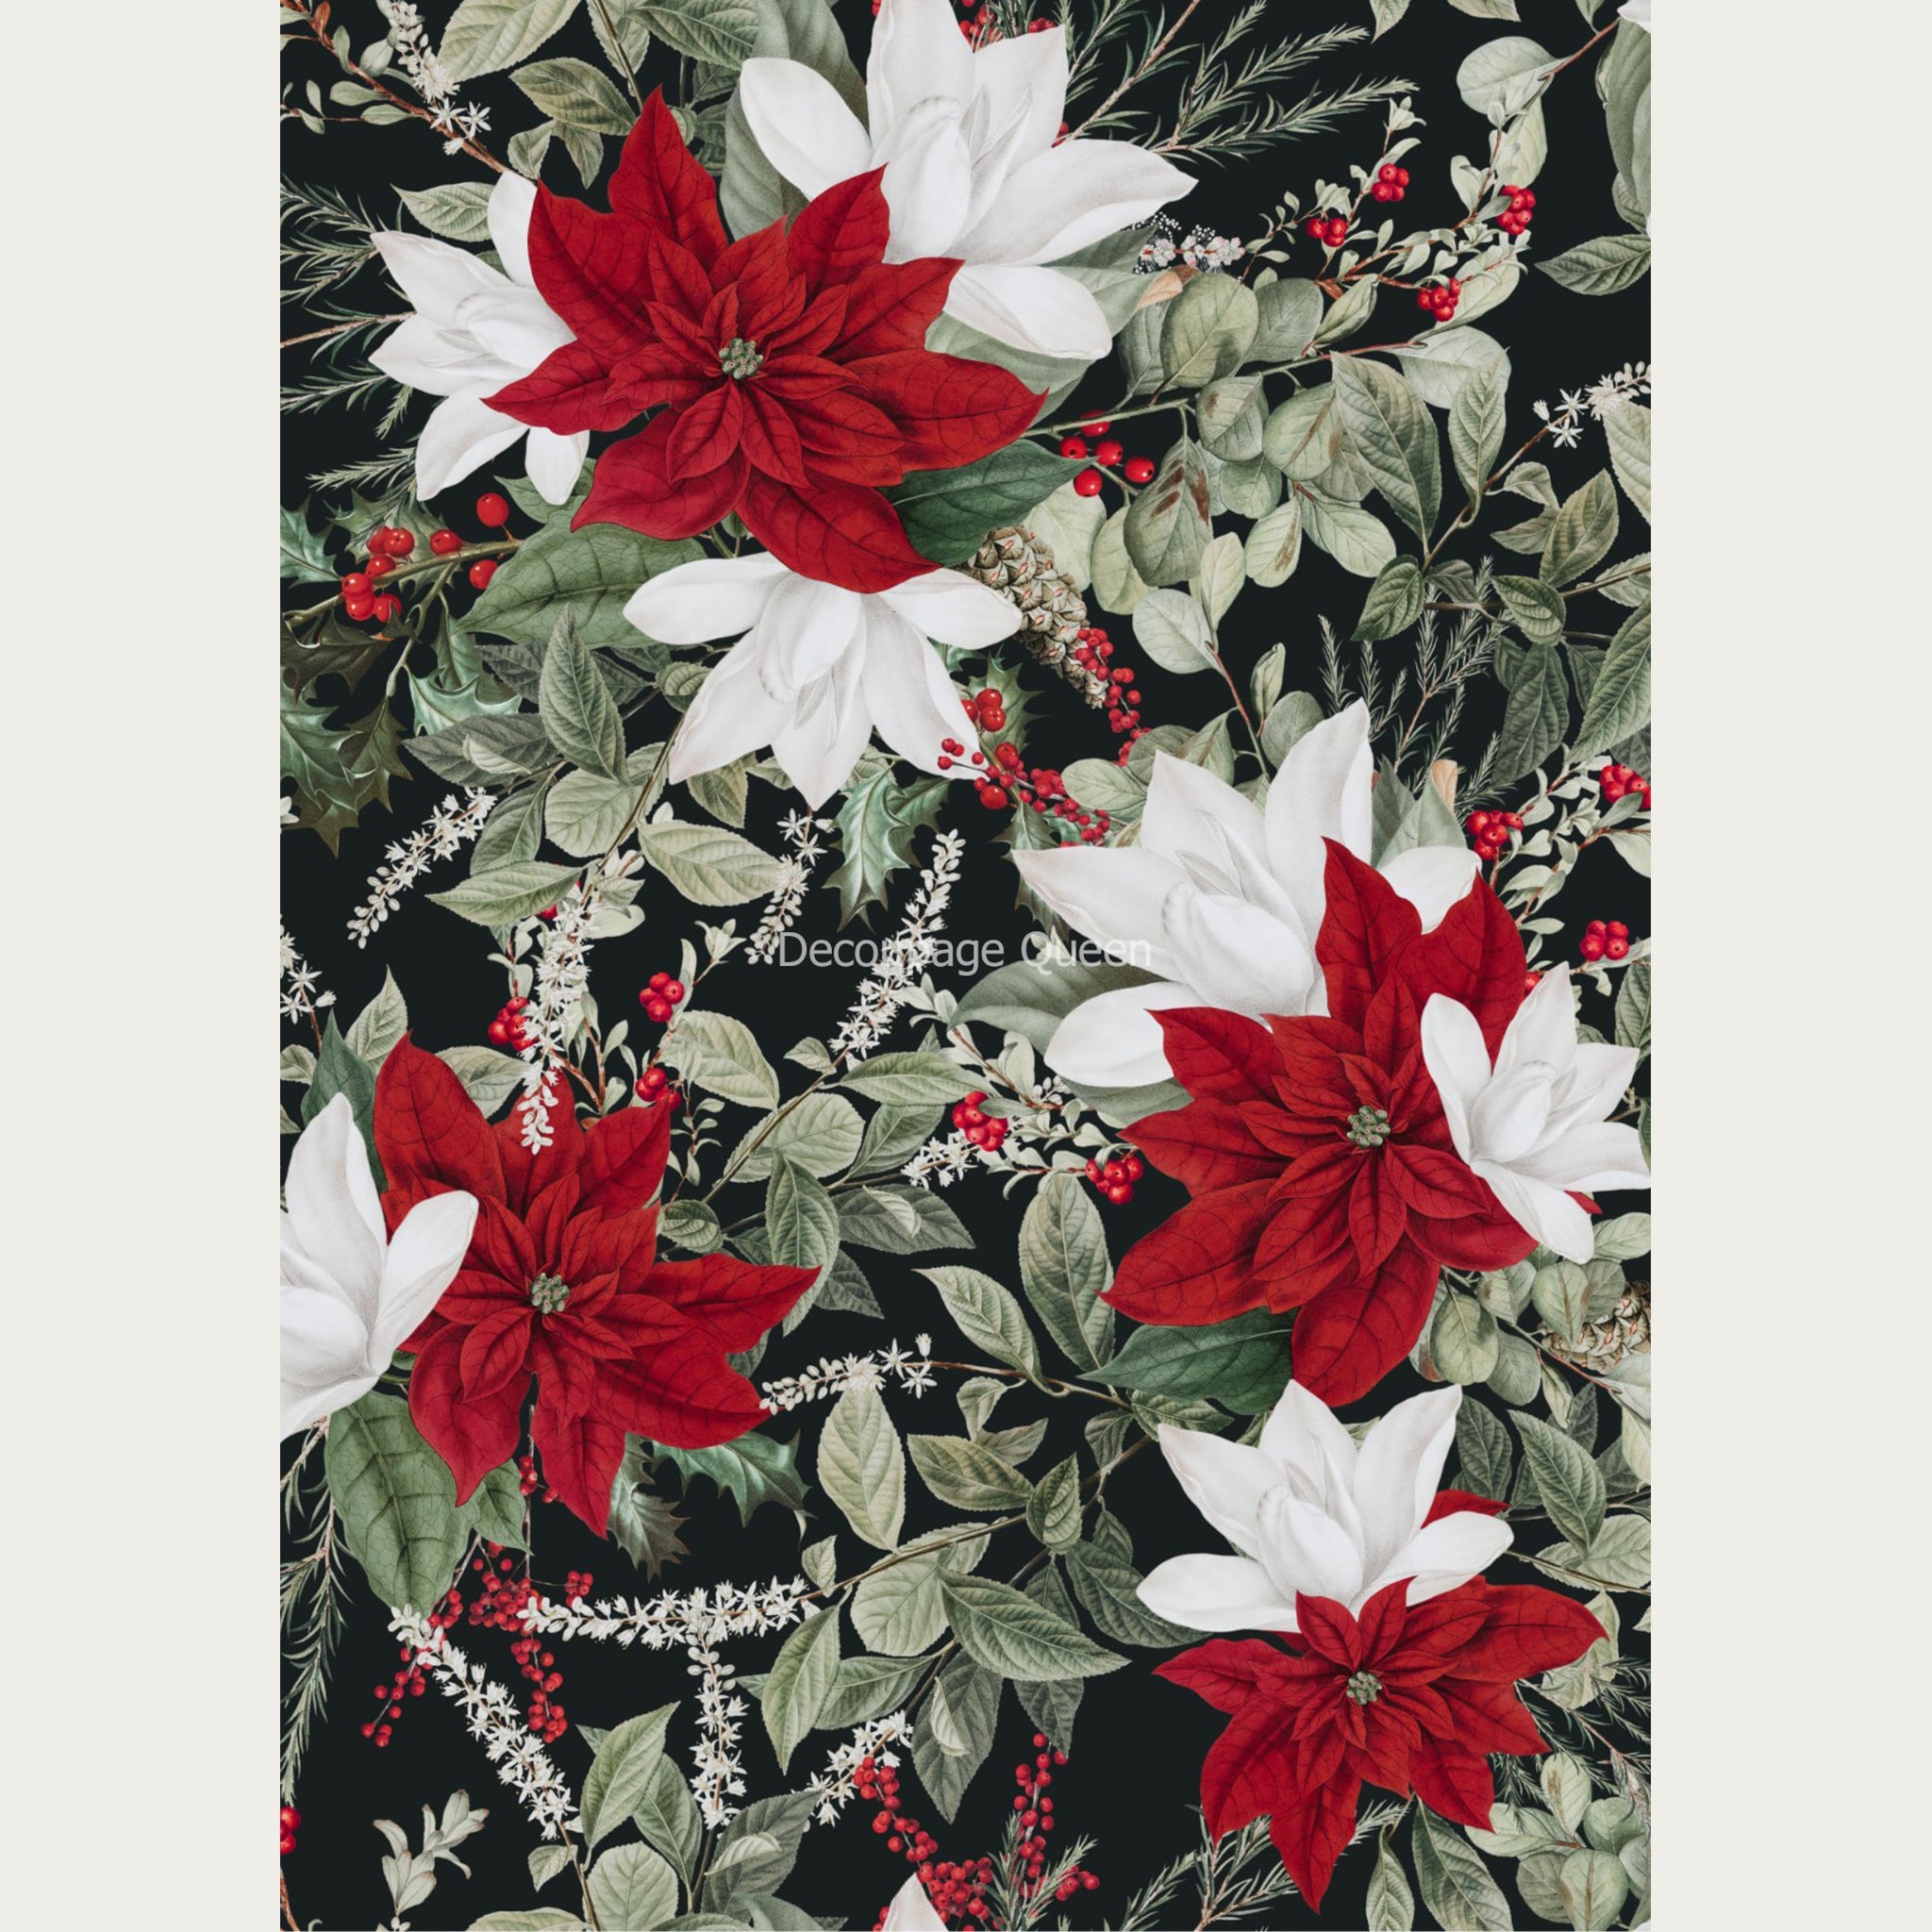 A2 rice paper design of red and white poinsettias with leaves on a black background. White borders are on the sides.